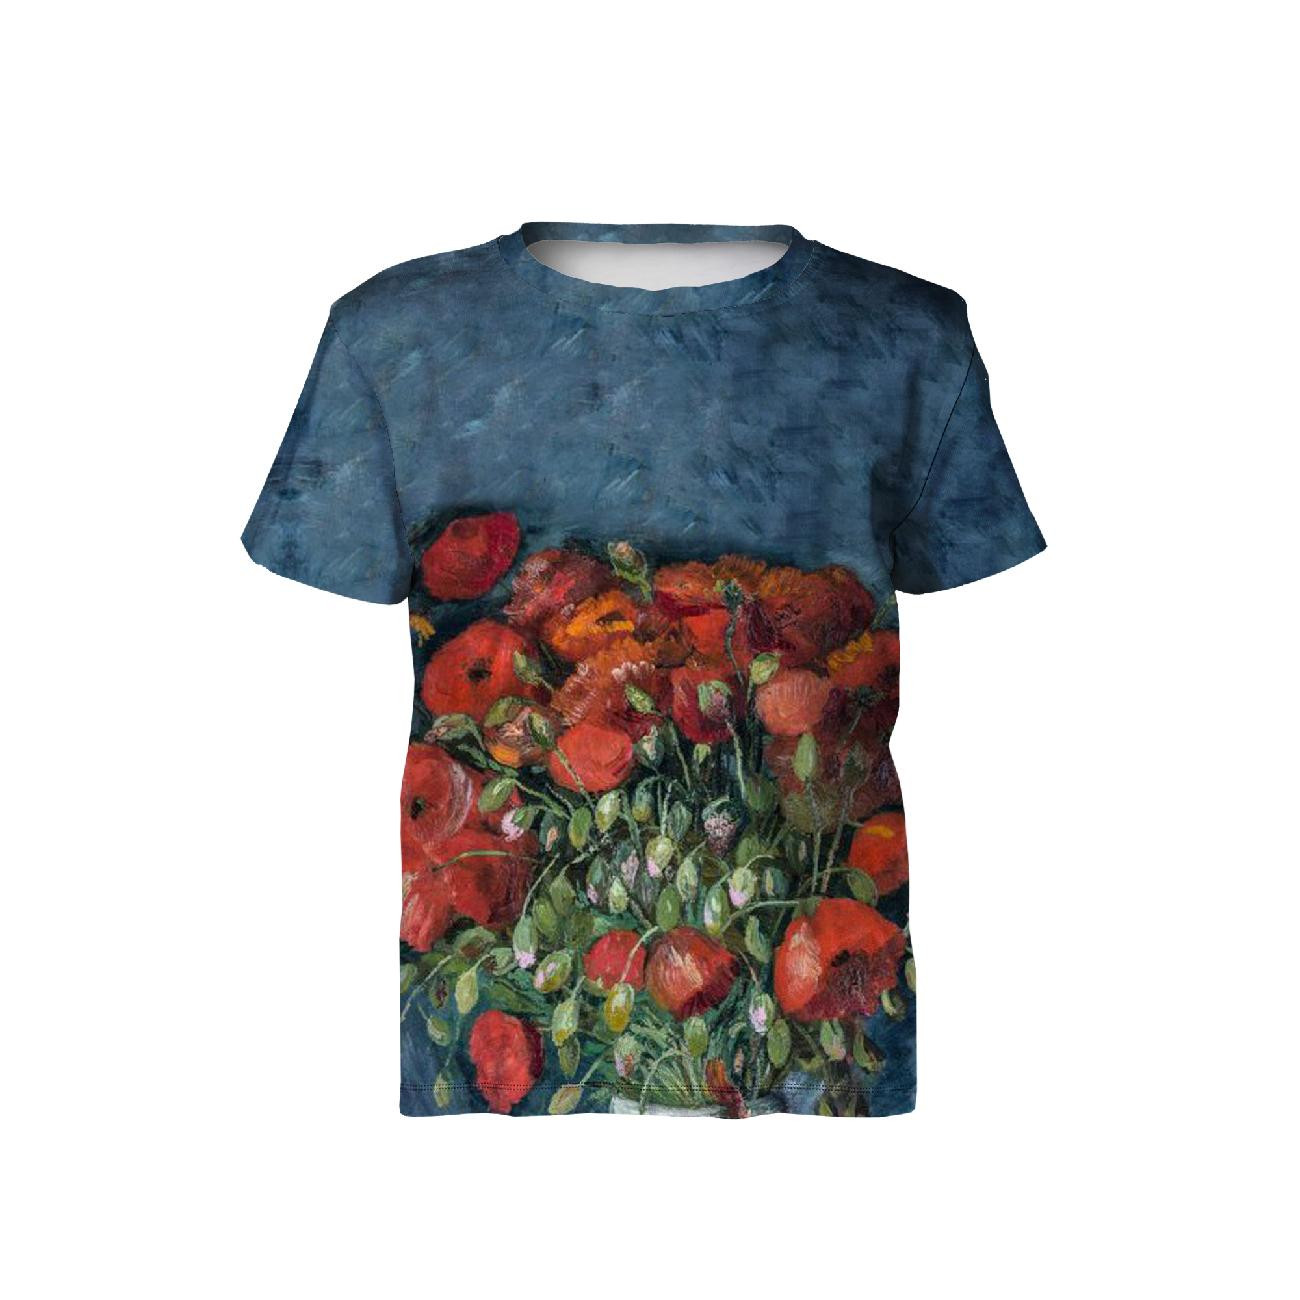 KID’S T-SHIRT - VASE WITH POPPIES (Vincent van Gogh) - sewing set